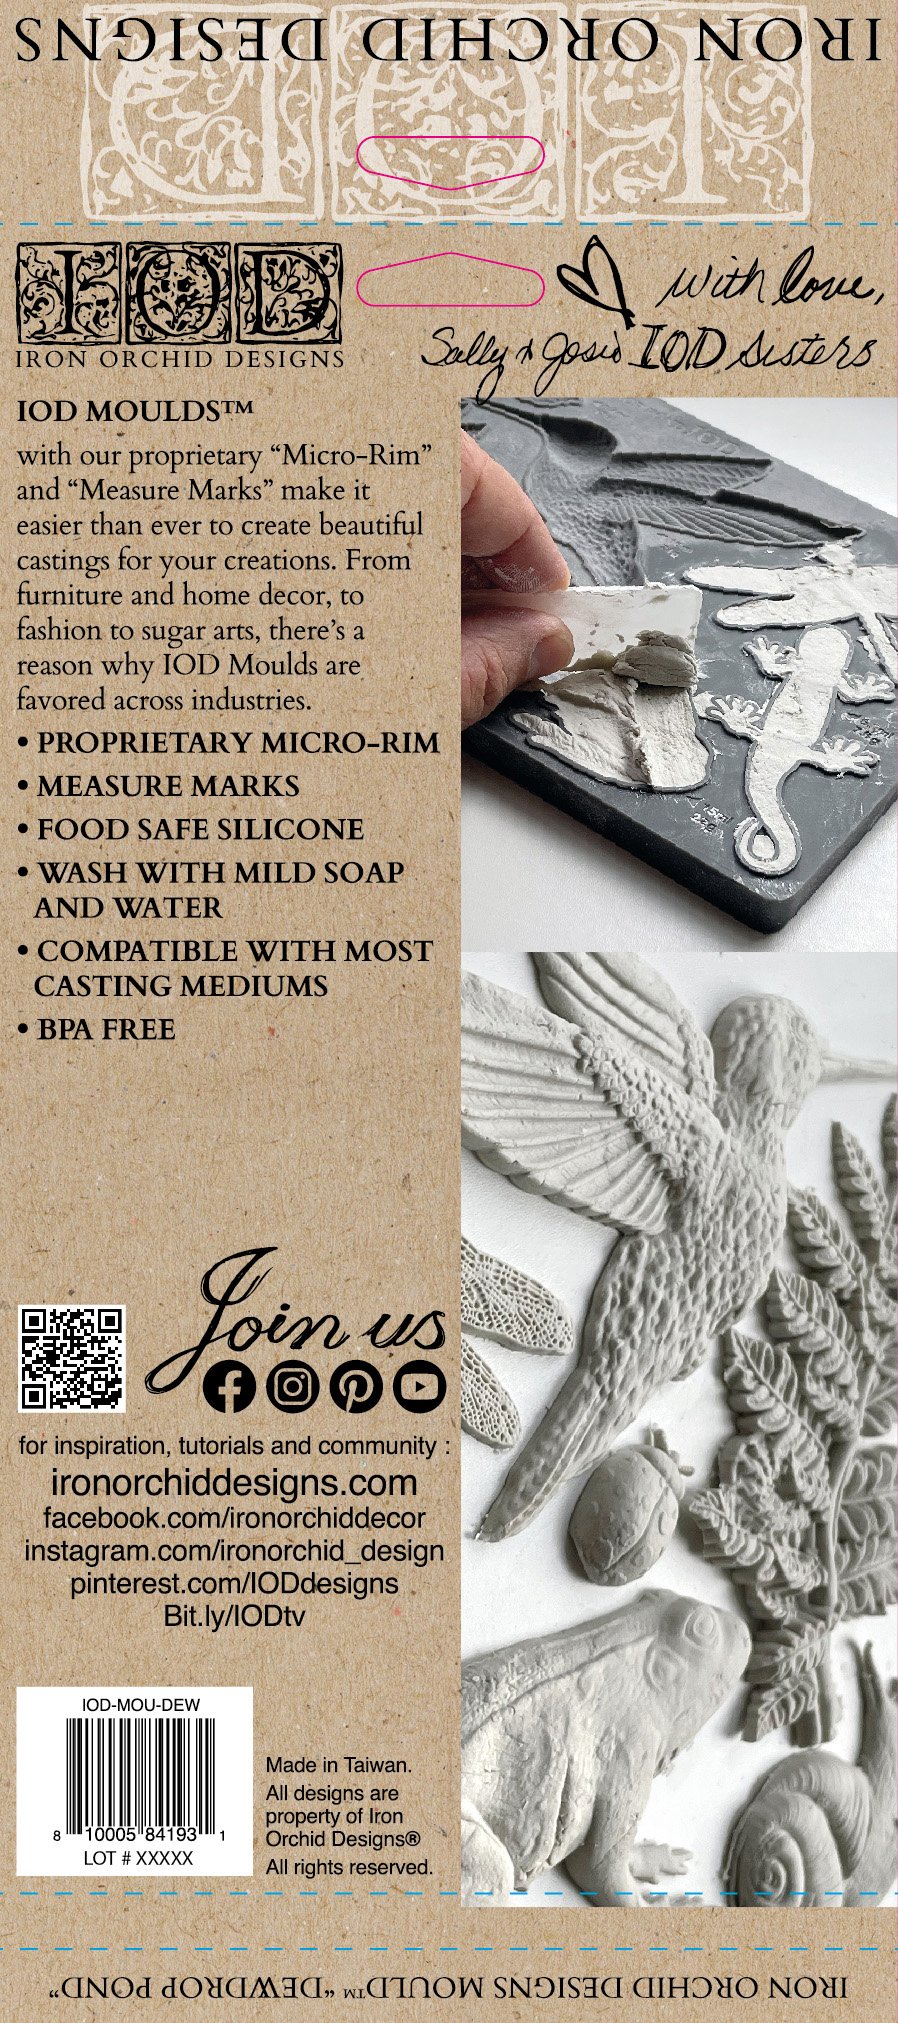 How to use IOD Moulds (or is it IOD Molds?) 